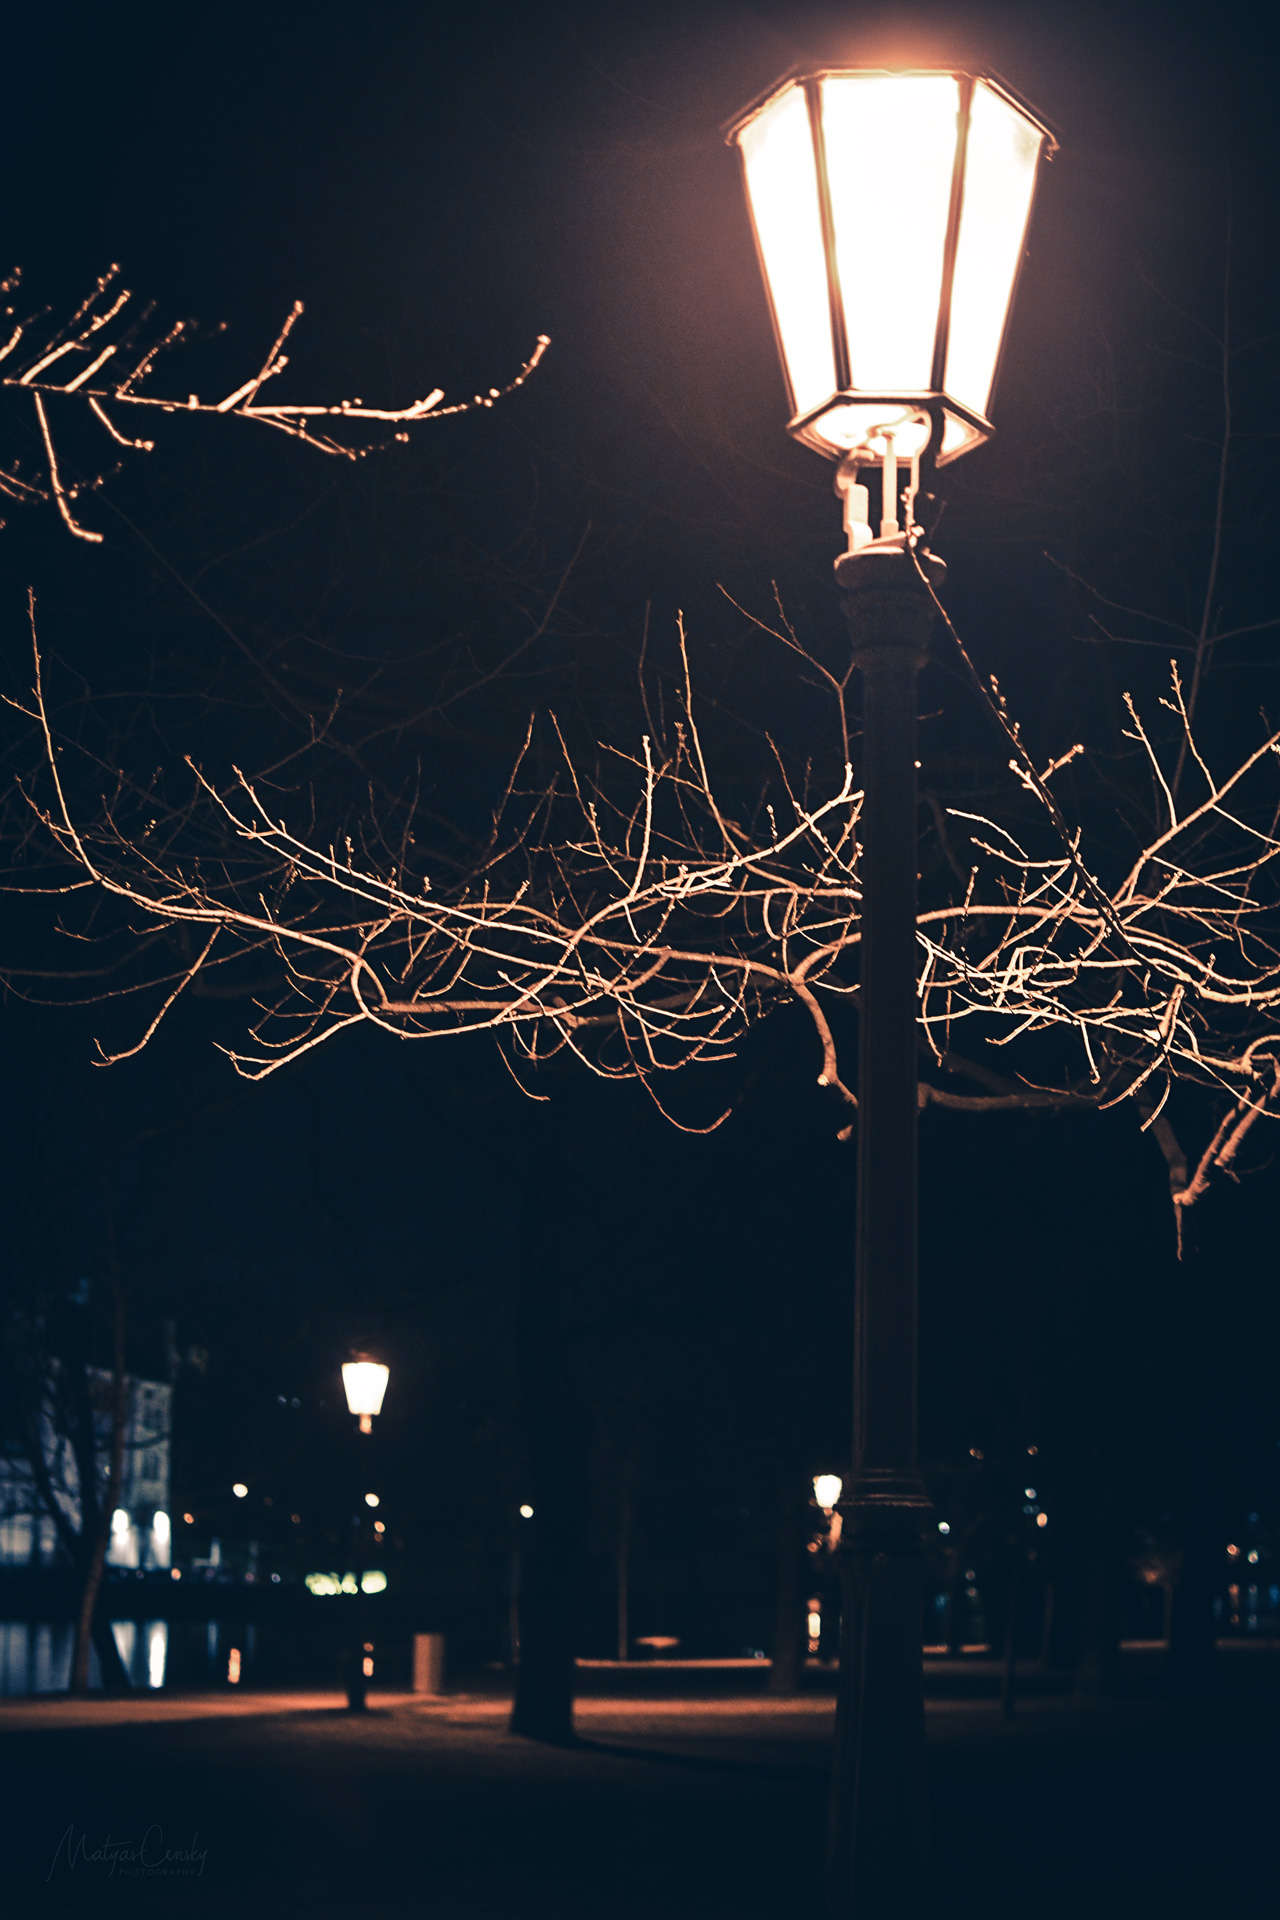 Night photo of an old lamp post with tree branch in background in a park in Prague, Czech republic.